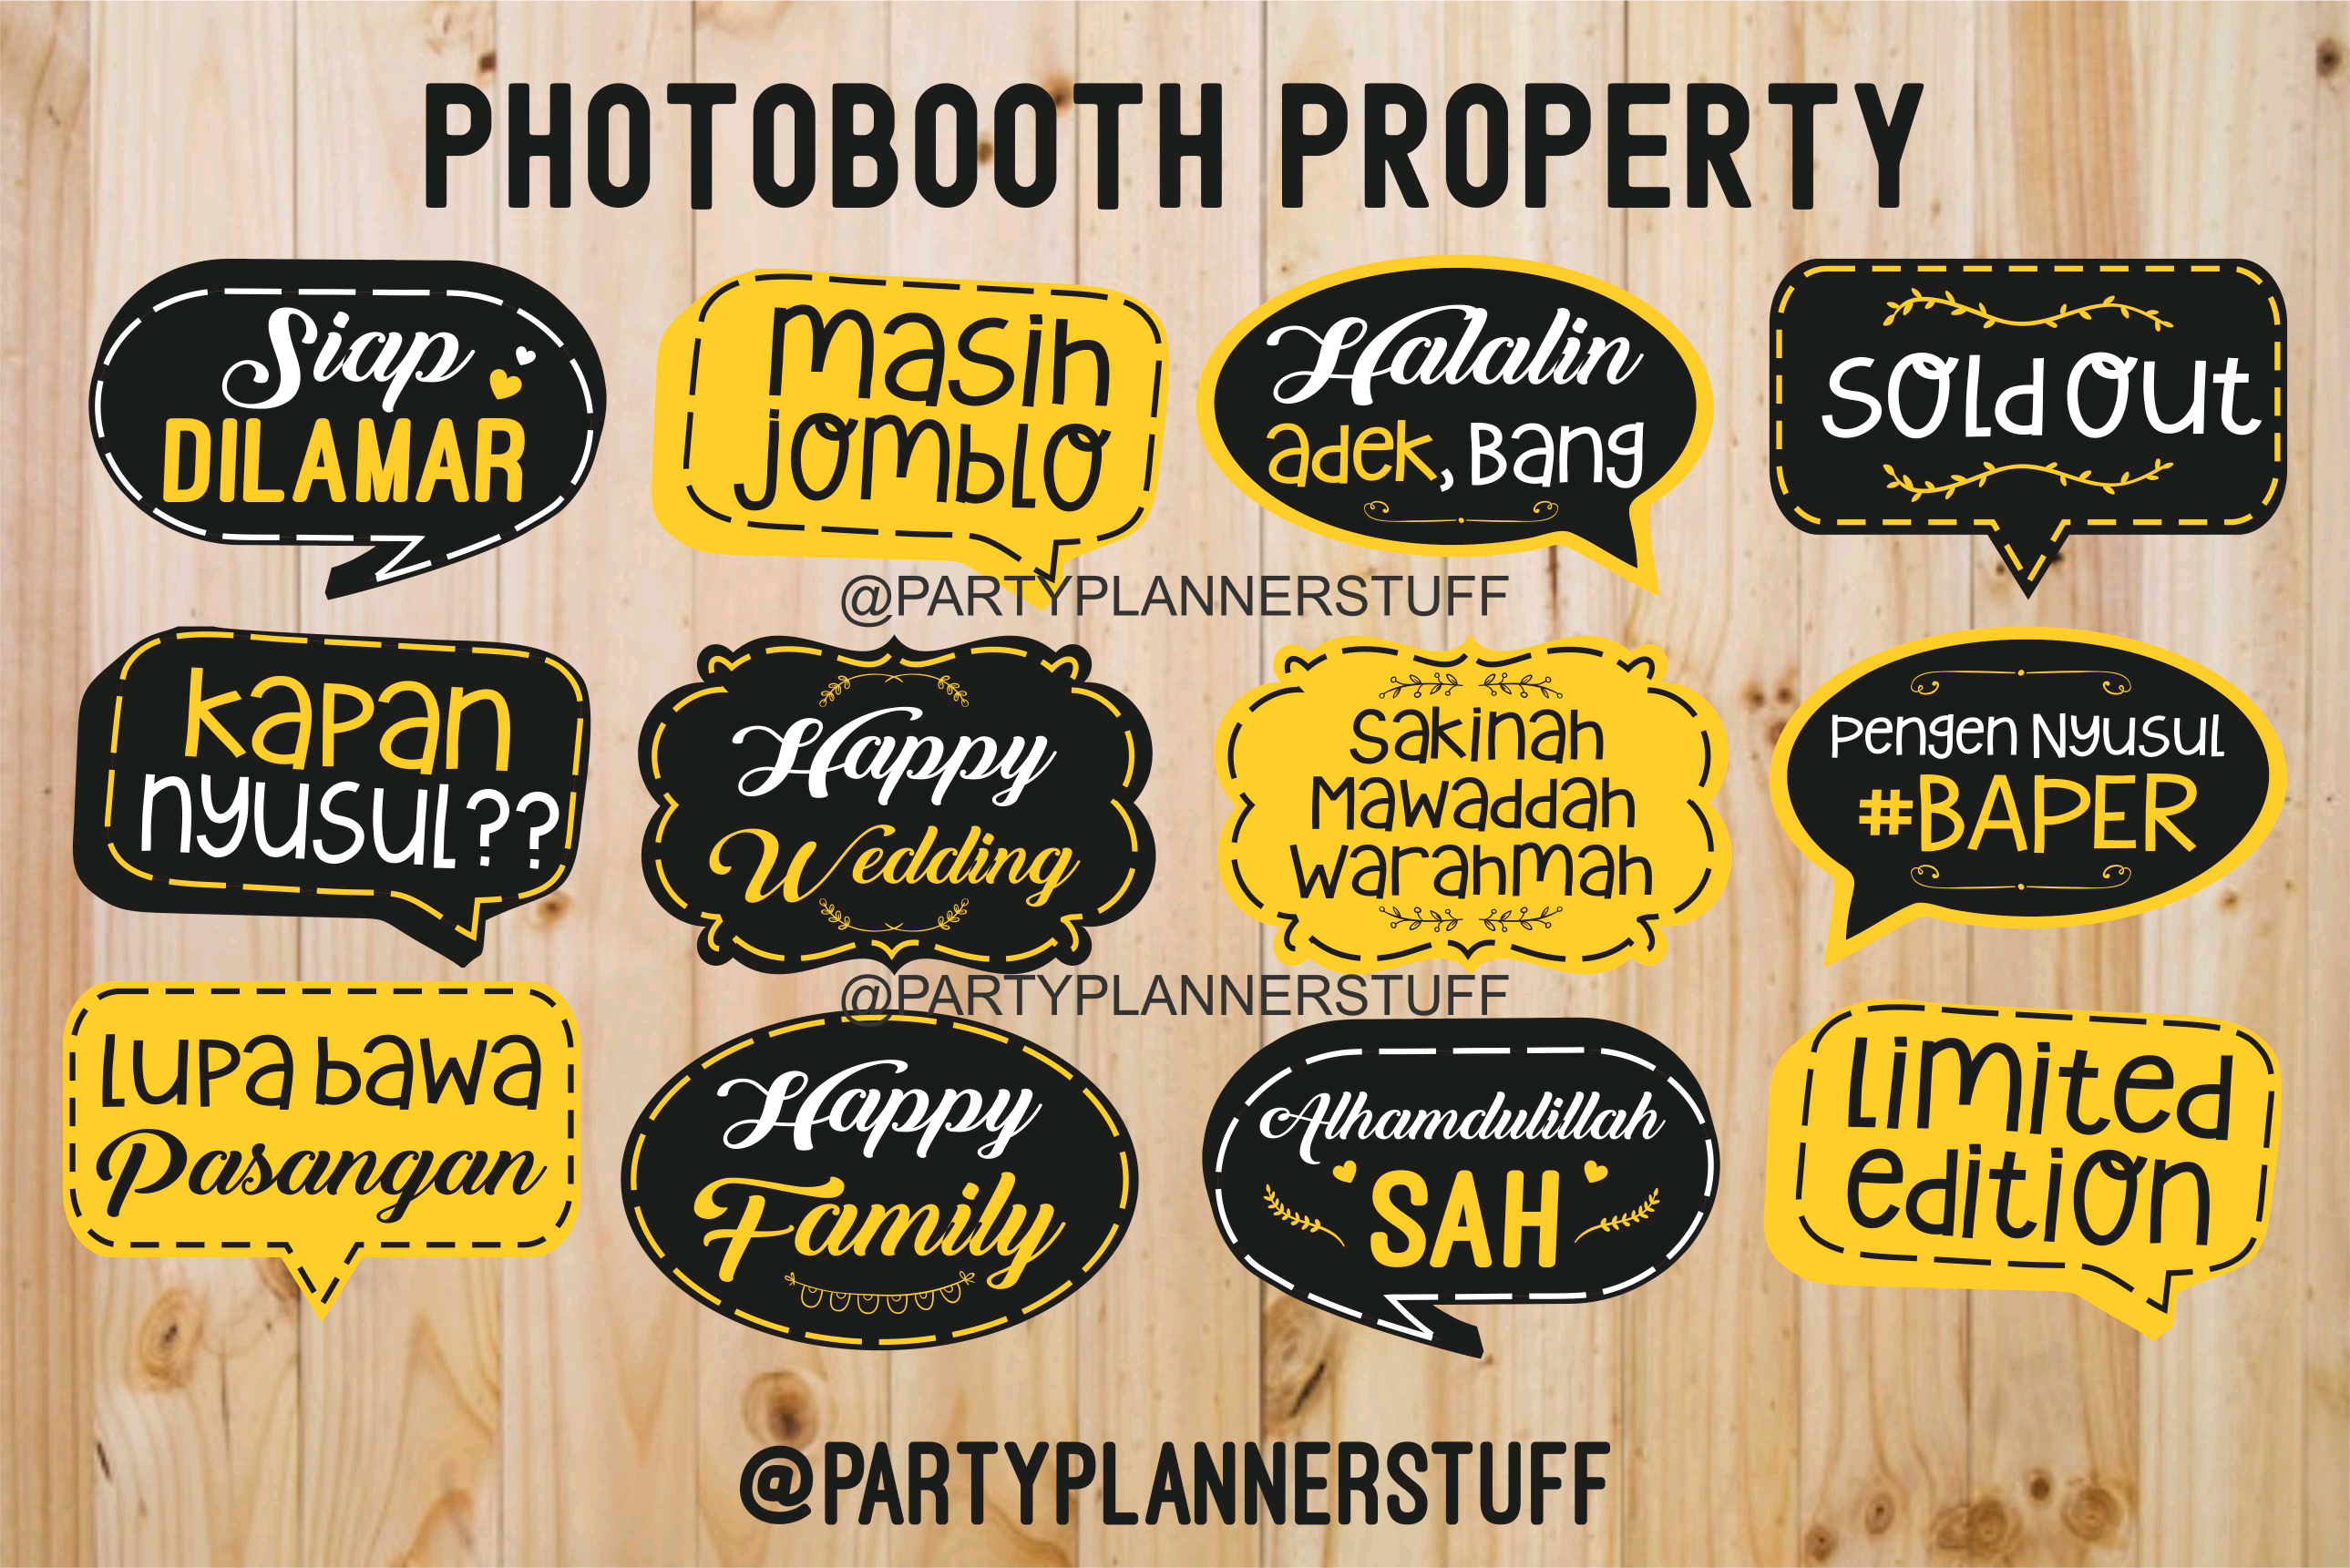 Detail Foto Booth Property Nomer 37